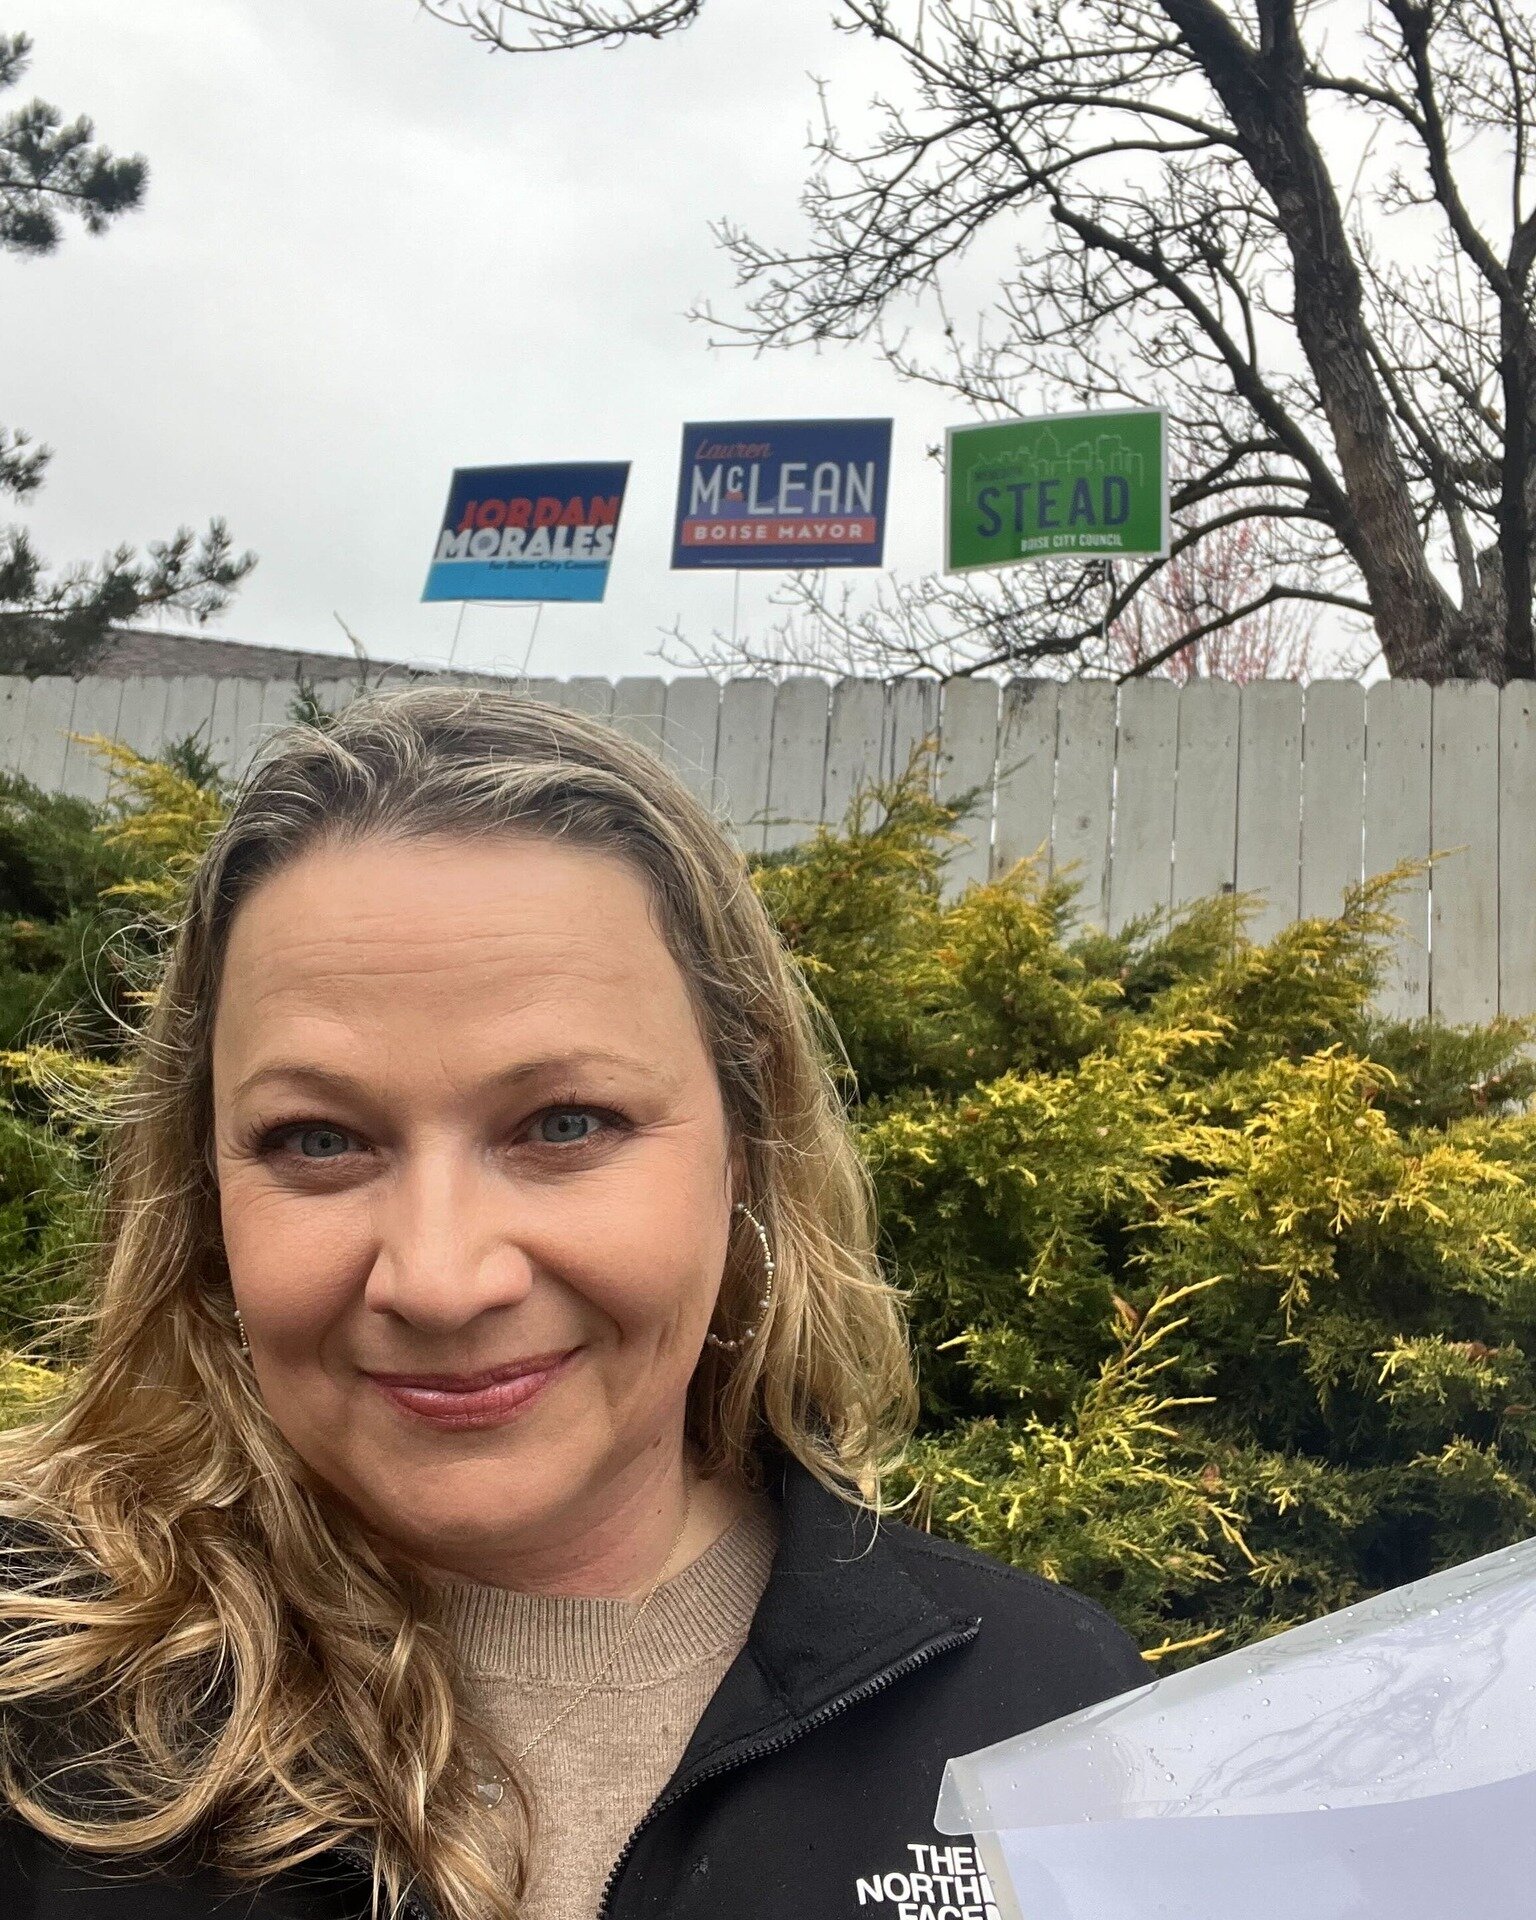 Look what I found while out knocking for Boise Gets Out the Vote!

I&rsquo;m gearing up for day TWO of GOTV at our headquarters, located at 1348 S. Vista. There are a ton of more shifts available from now until the polls close at 8pm on November 7! I